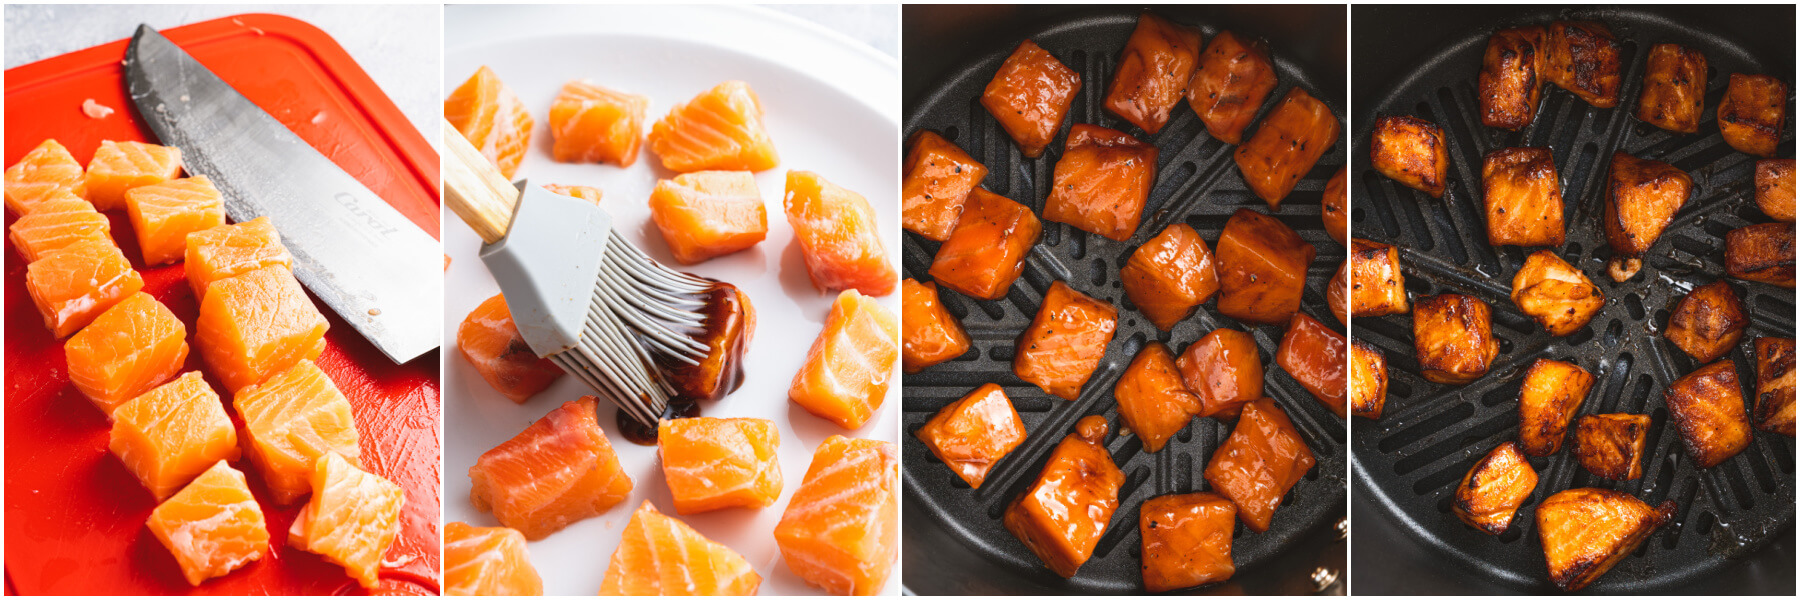 Process images showing how to cut, marinate, and cook air fryer salmon bites.